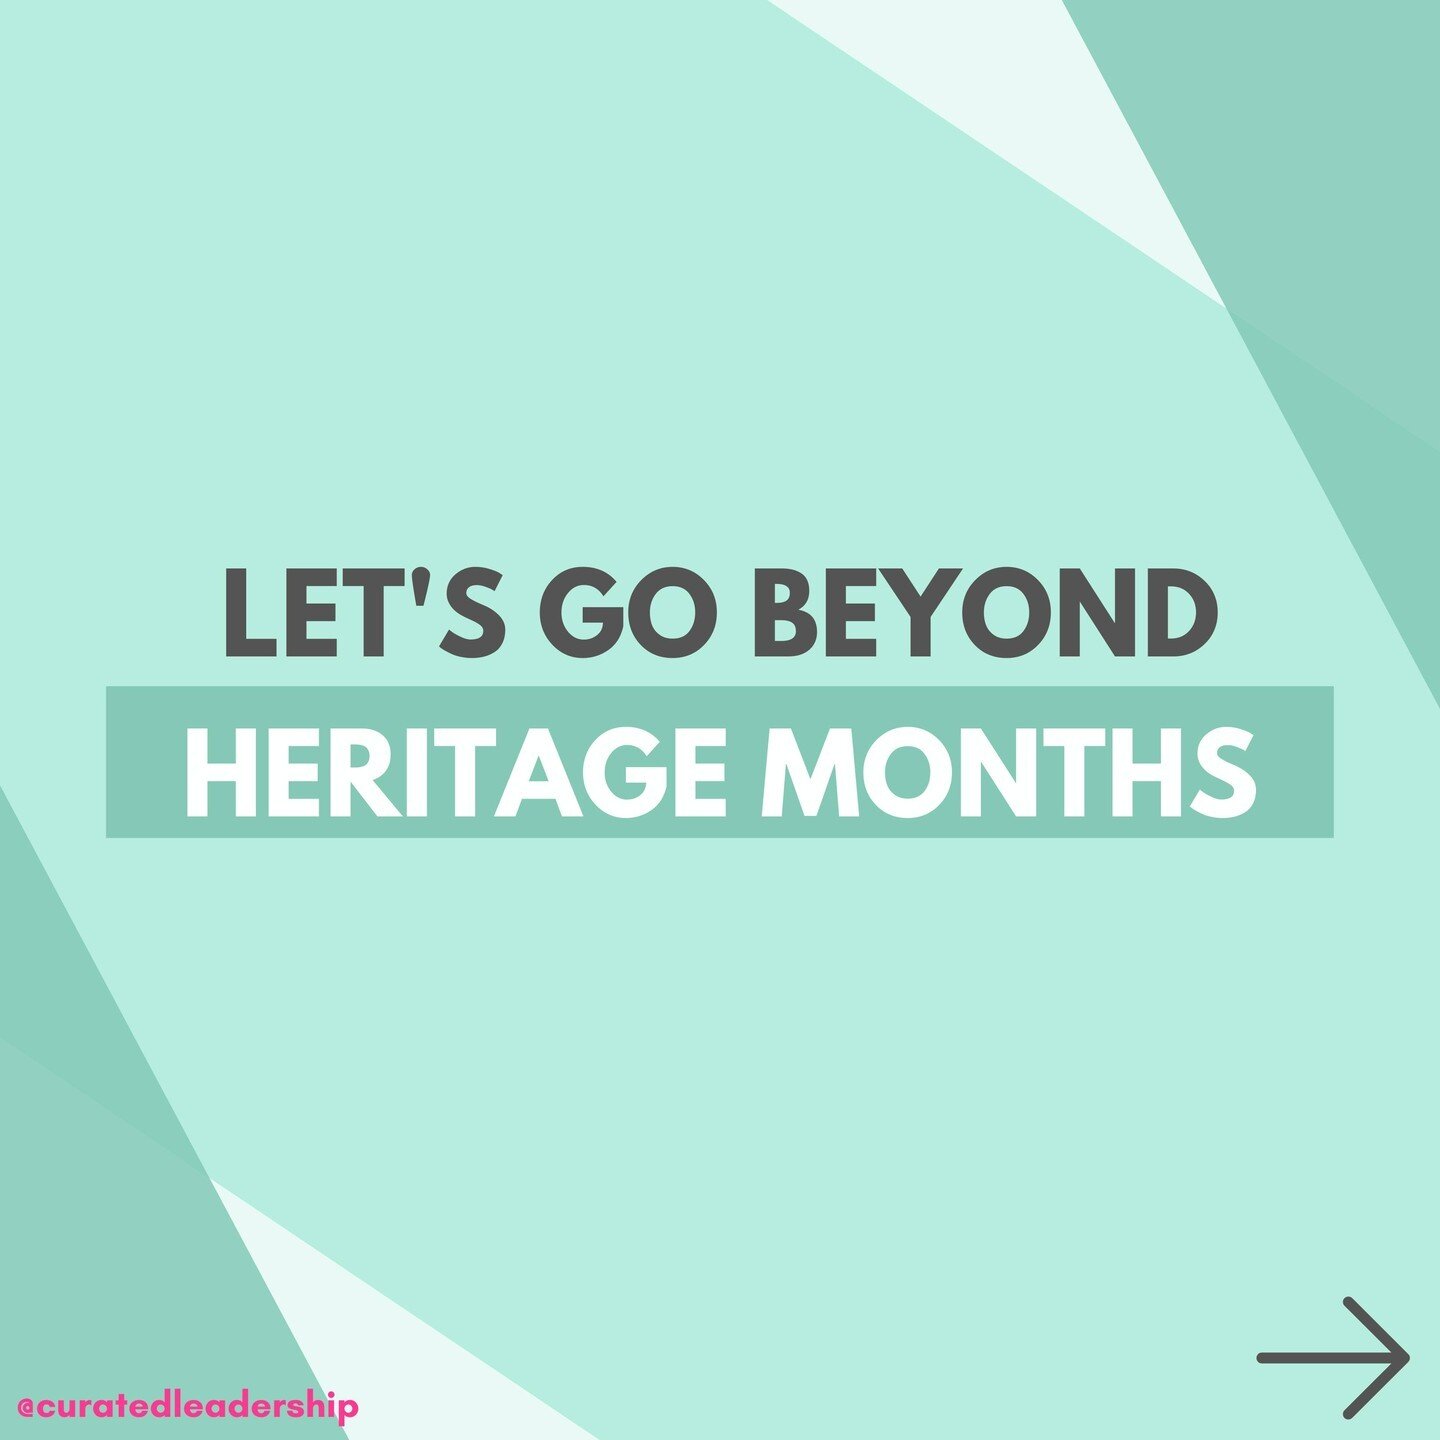 As we come to the end of Asian Heritage/AAPI month and head into a month with much dedicated to it (National Indigenous History Month, Italian Heritage Month, Filipino Heritage Month, Portuguese Heritage Month and Pride!), we reflect on how to assure